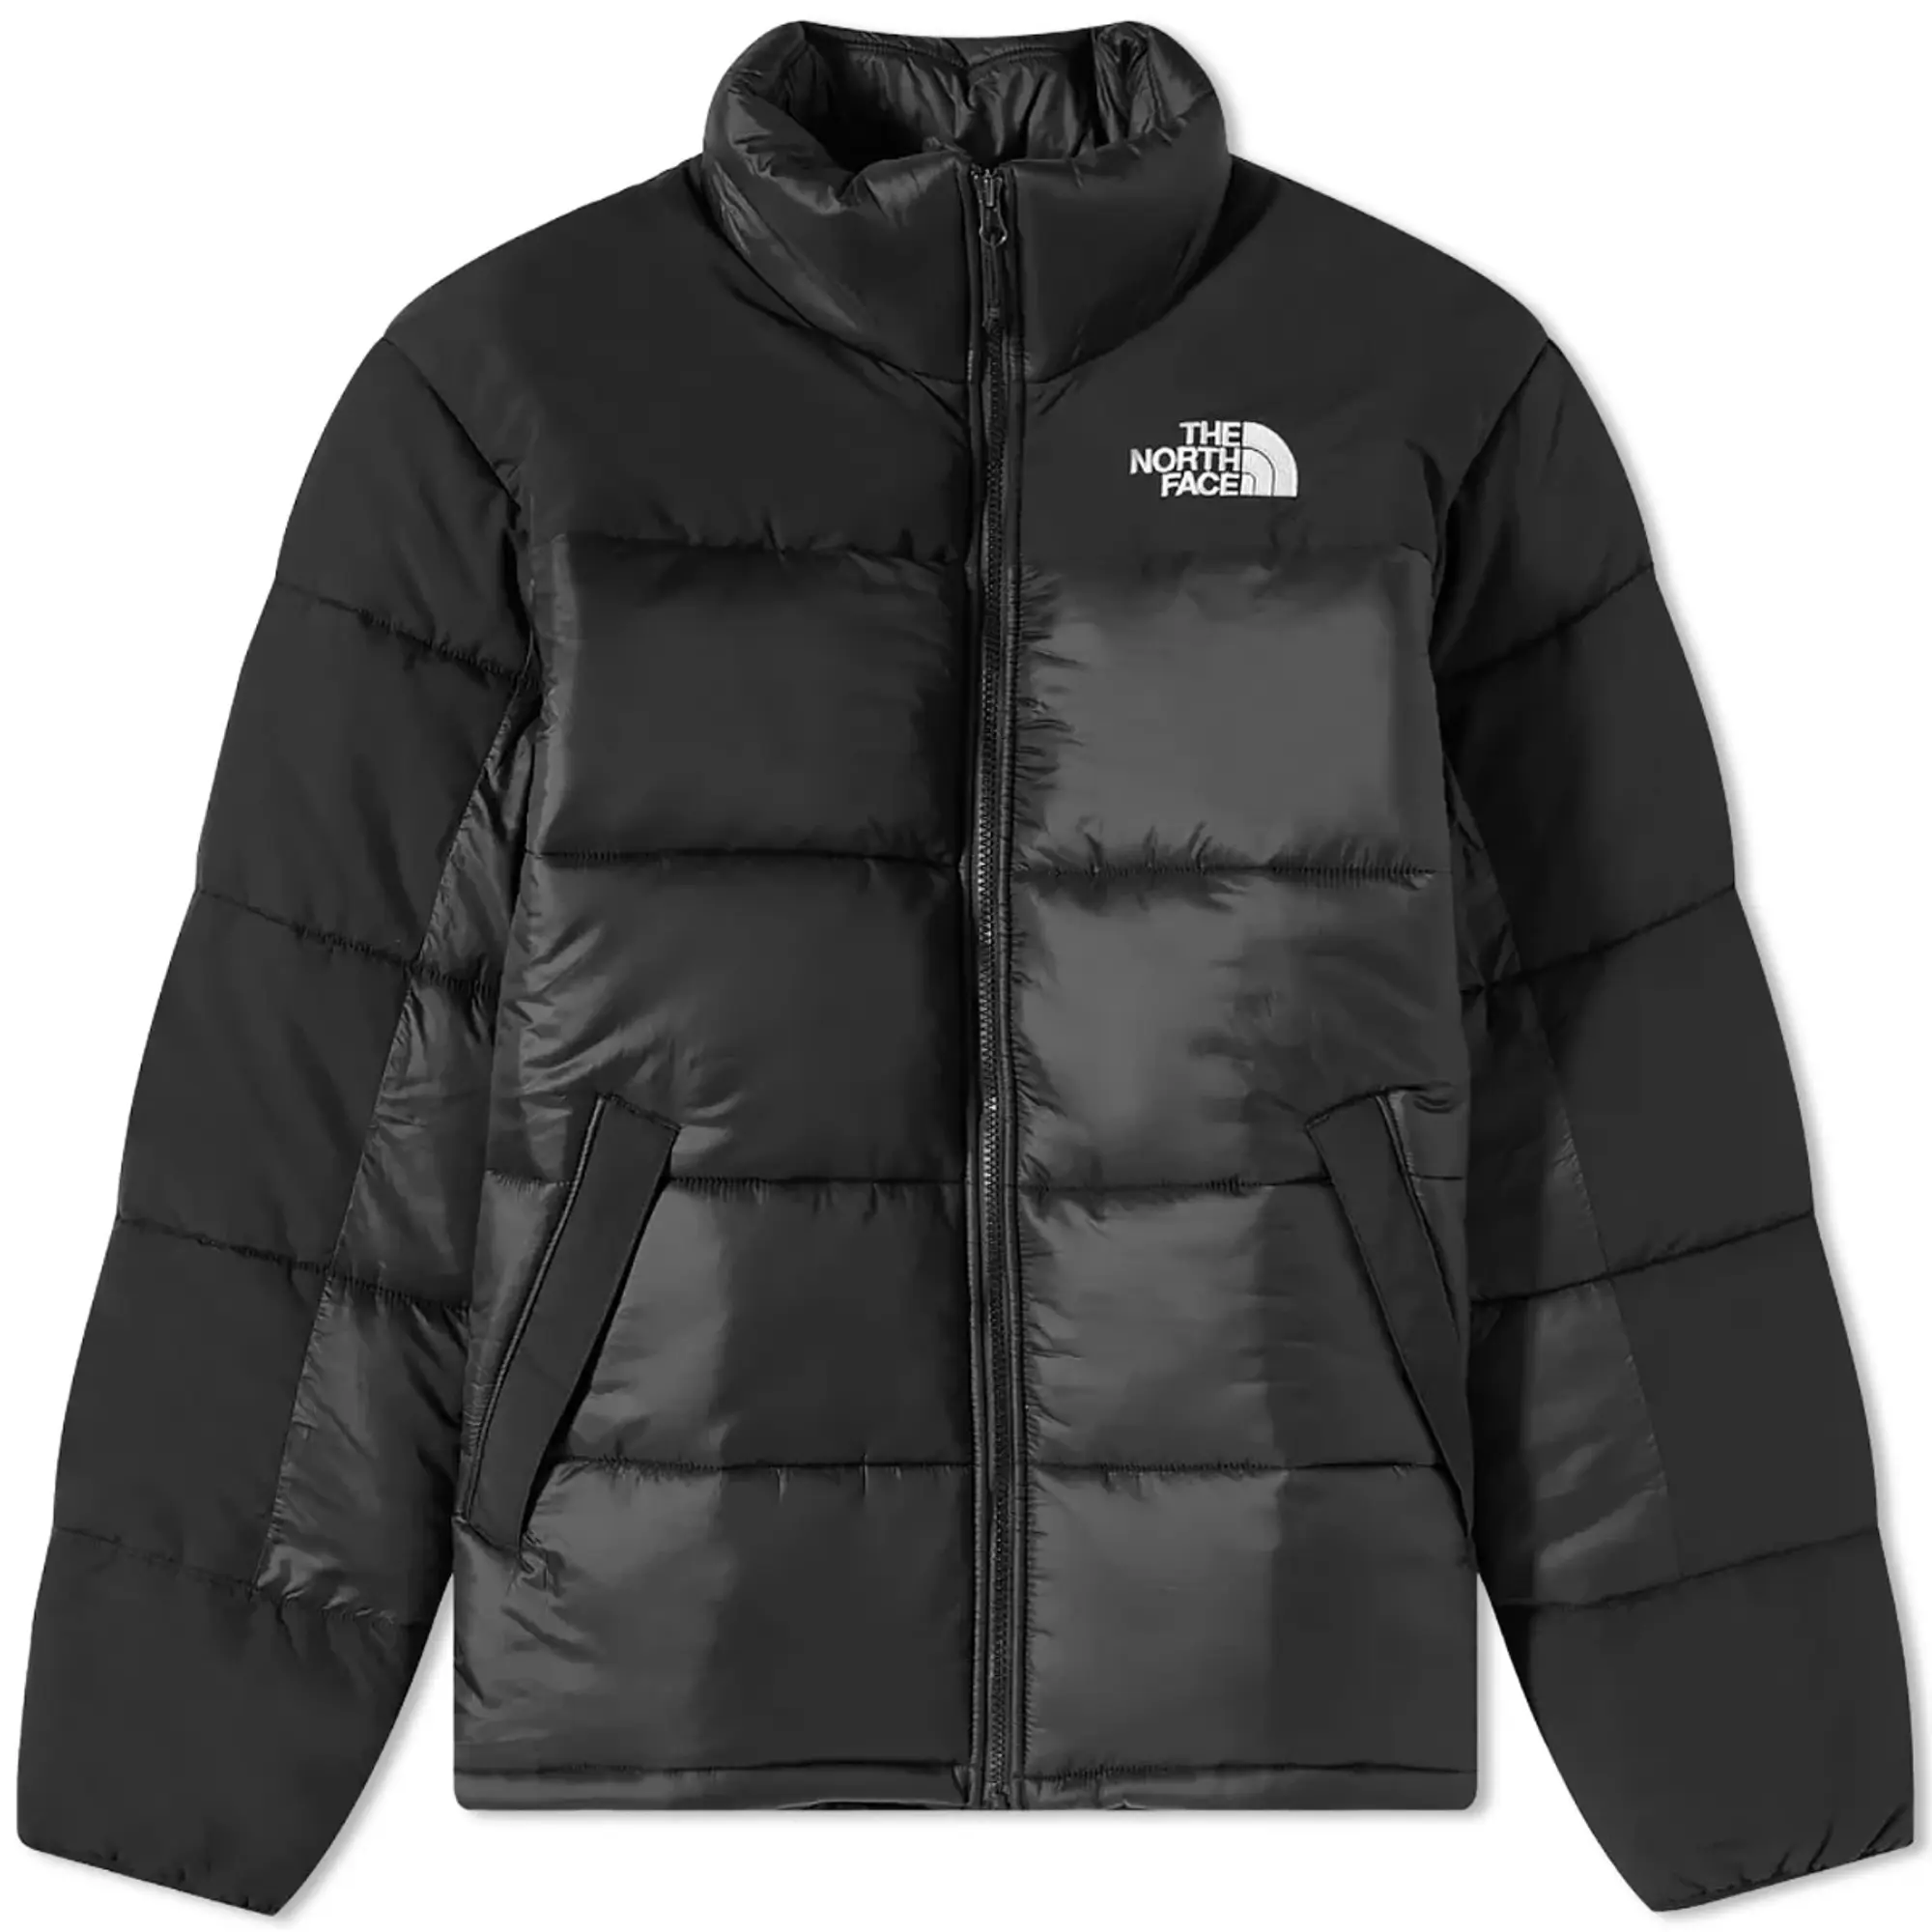 The North Face Men's Himalayan Insulated Jacket Black